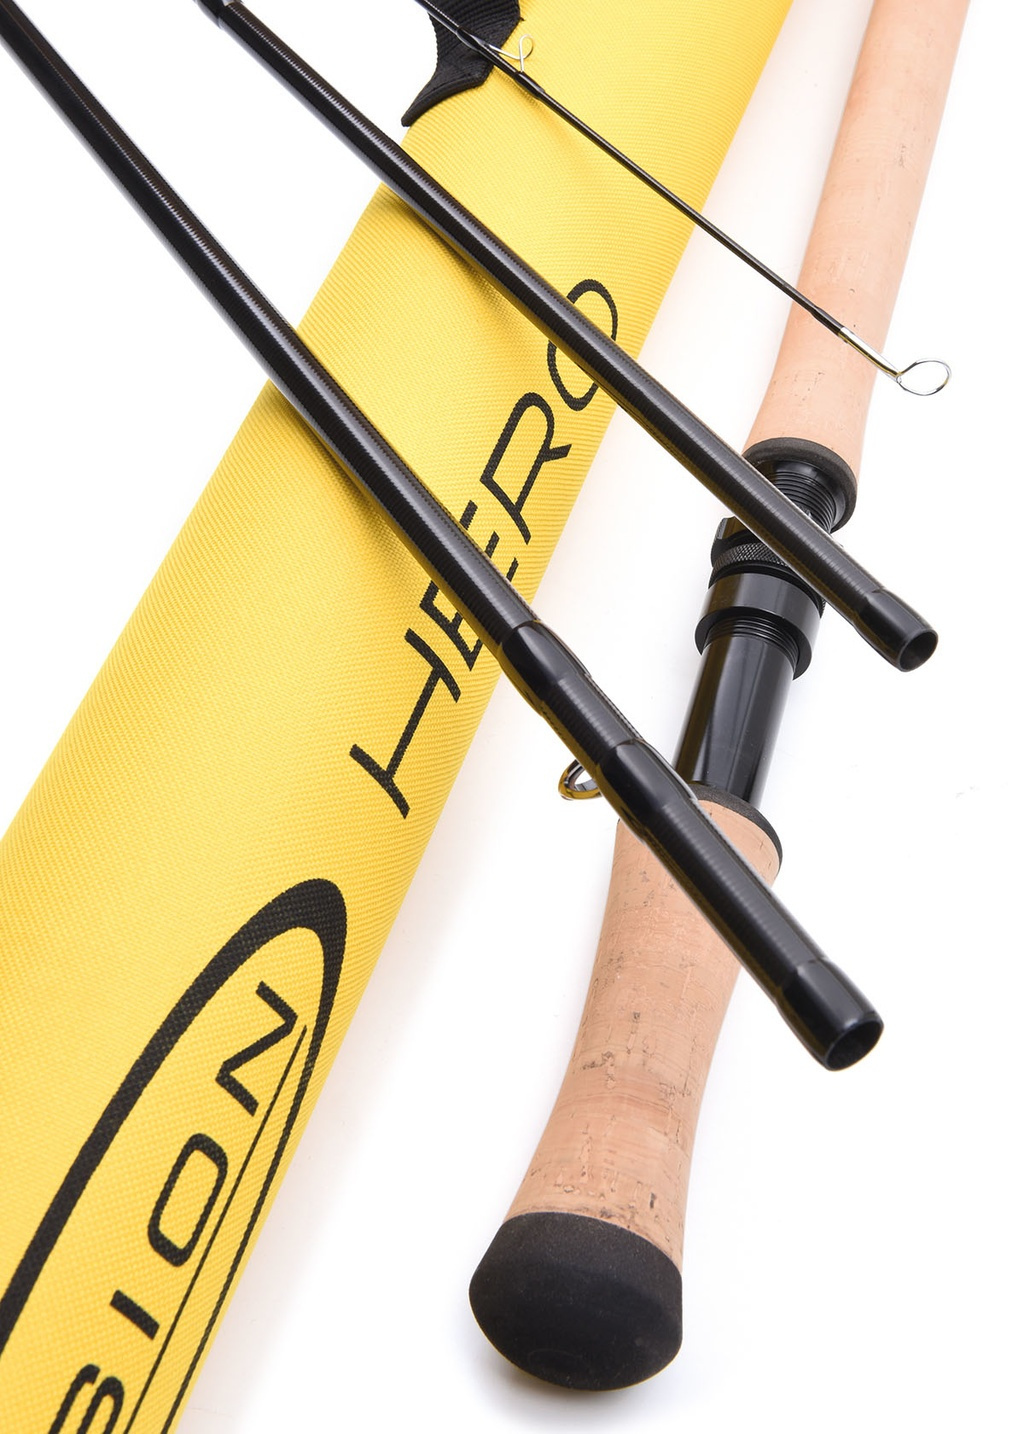 Vision Hero DH Fly Rod - # 9 14\'7\'\'